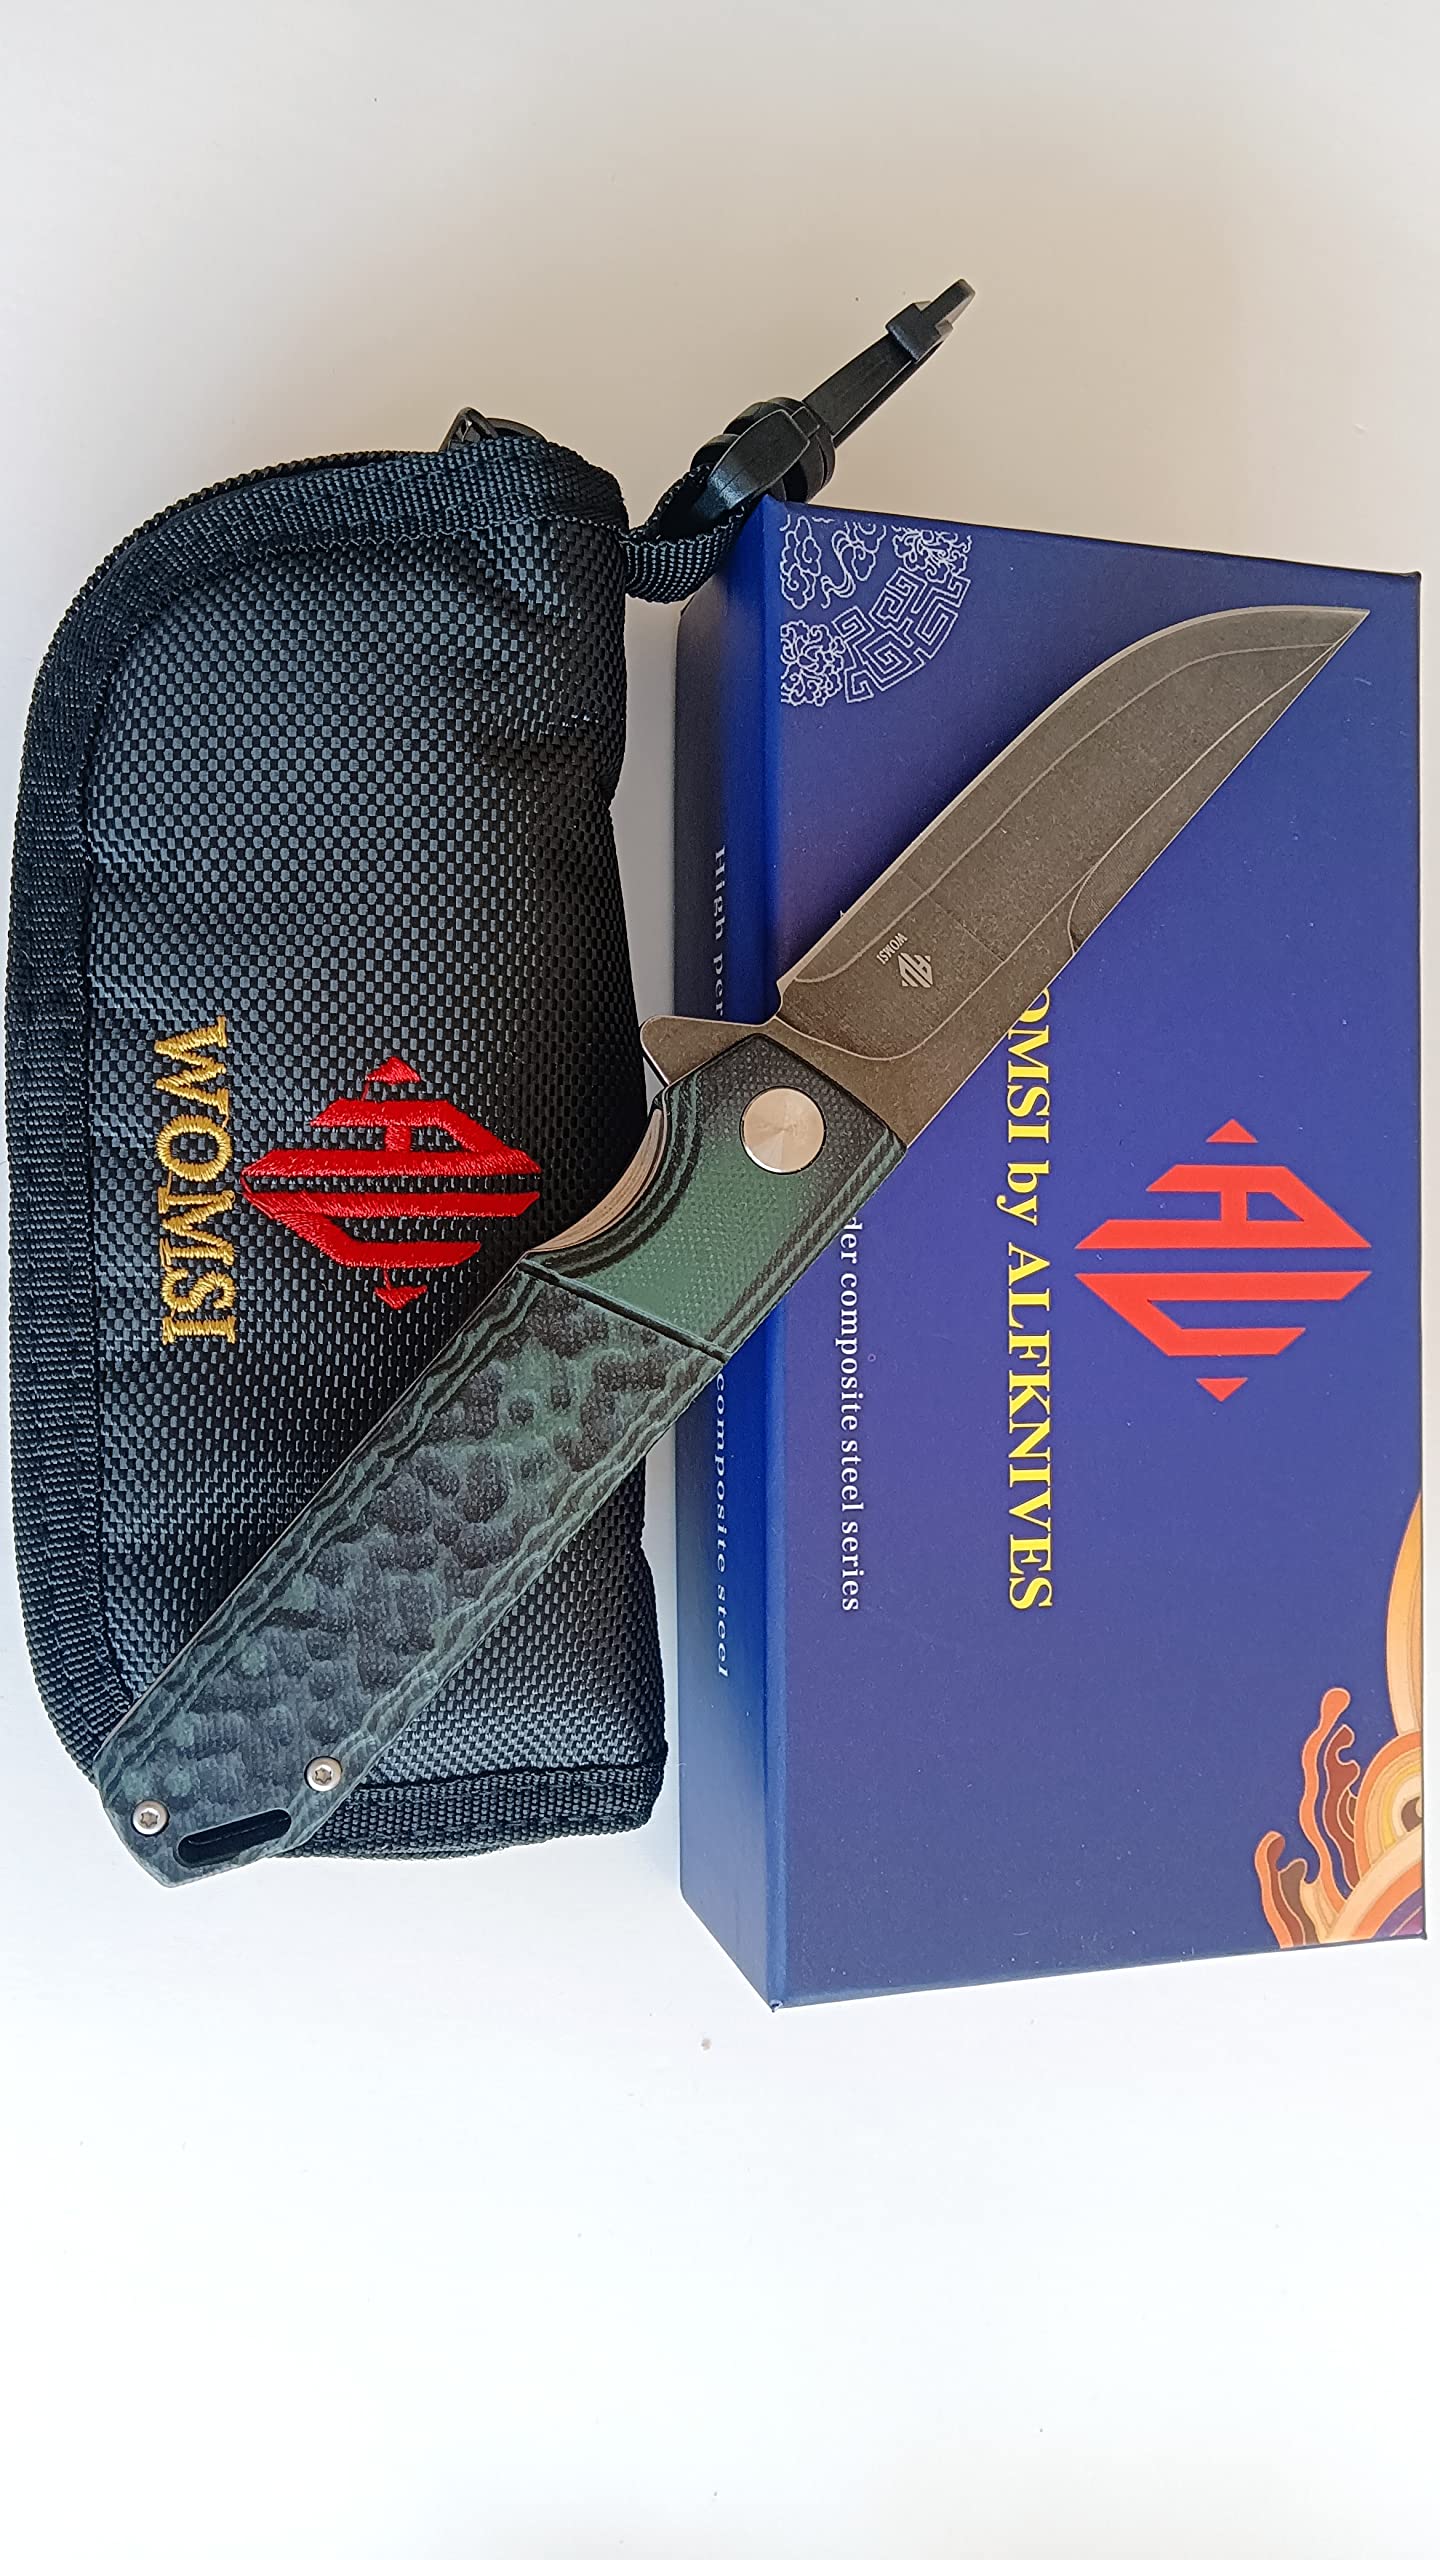 WOMSI Folding Knife,420 Stainless Steel/60HRC Blade,Sonorous&durable G10 Handle,Ceramic Bearing Inside,for Hunter Outdoor Bushcraft Fishing Hiking,with Gift Box